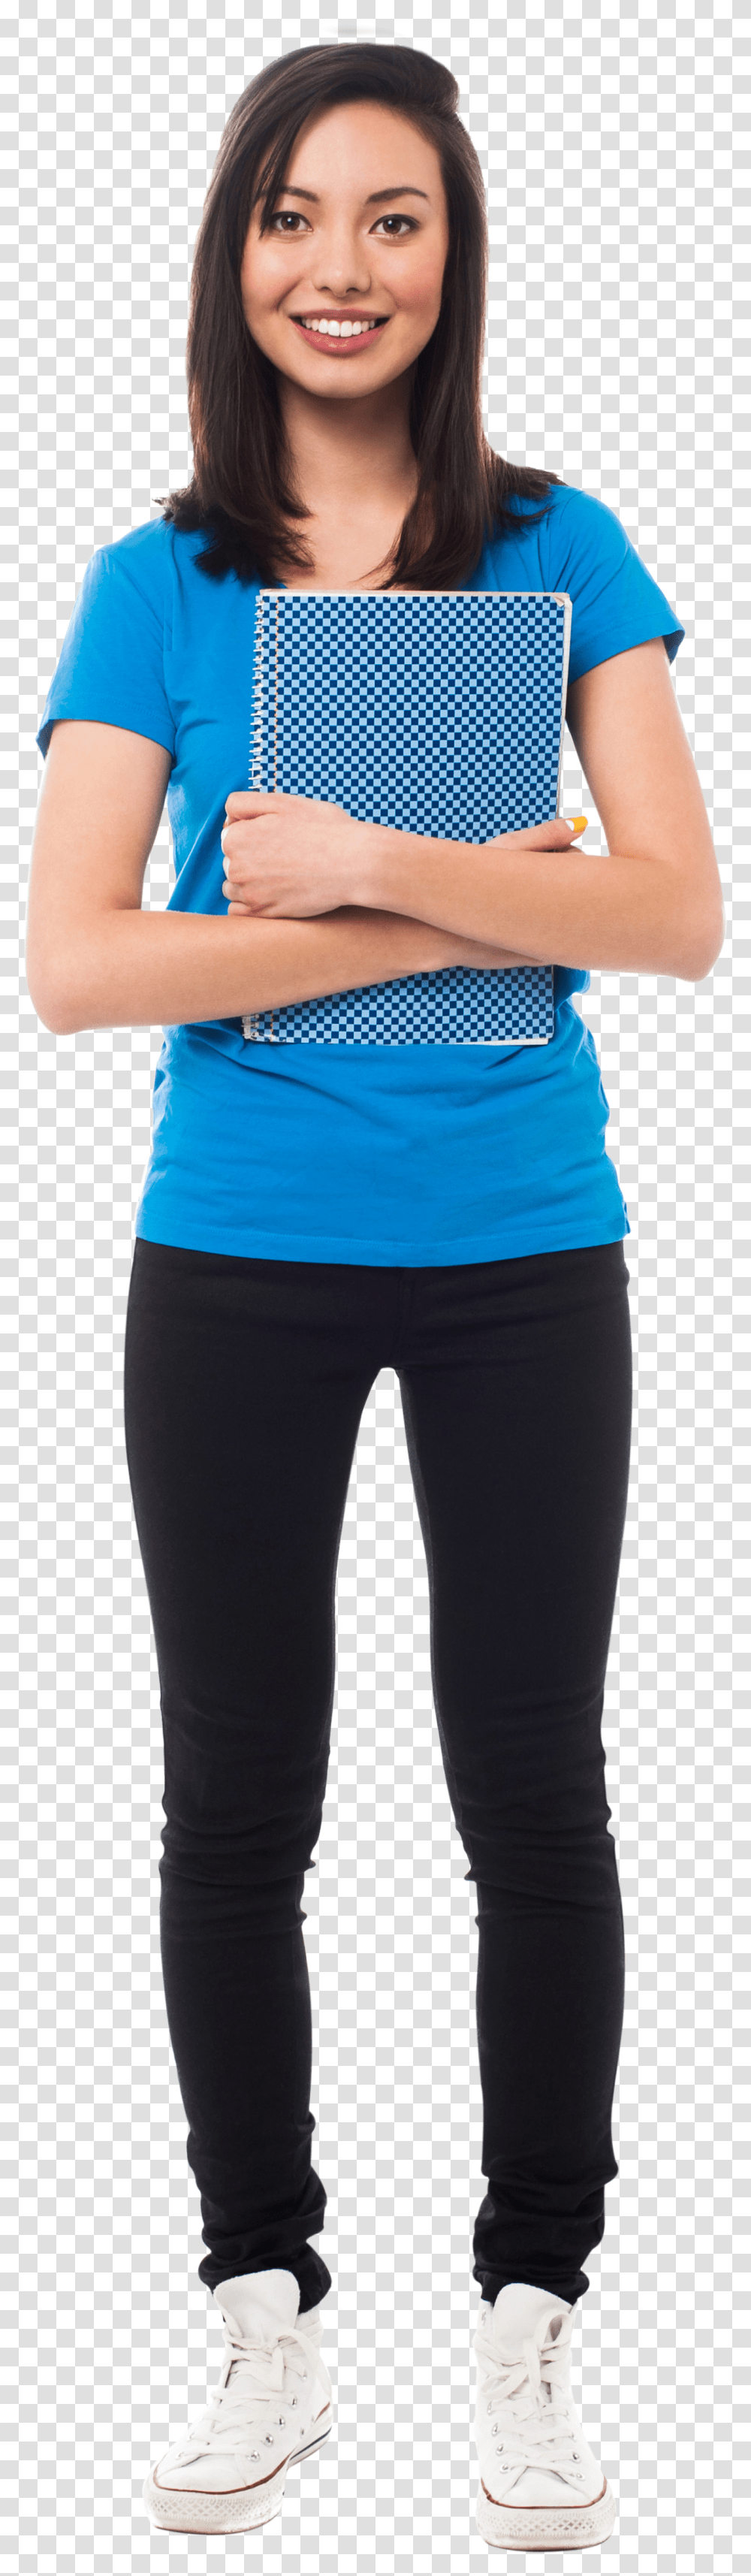 Woman Student Stock Photo Standing Girl Transparent Png